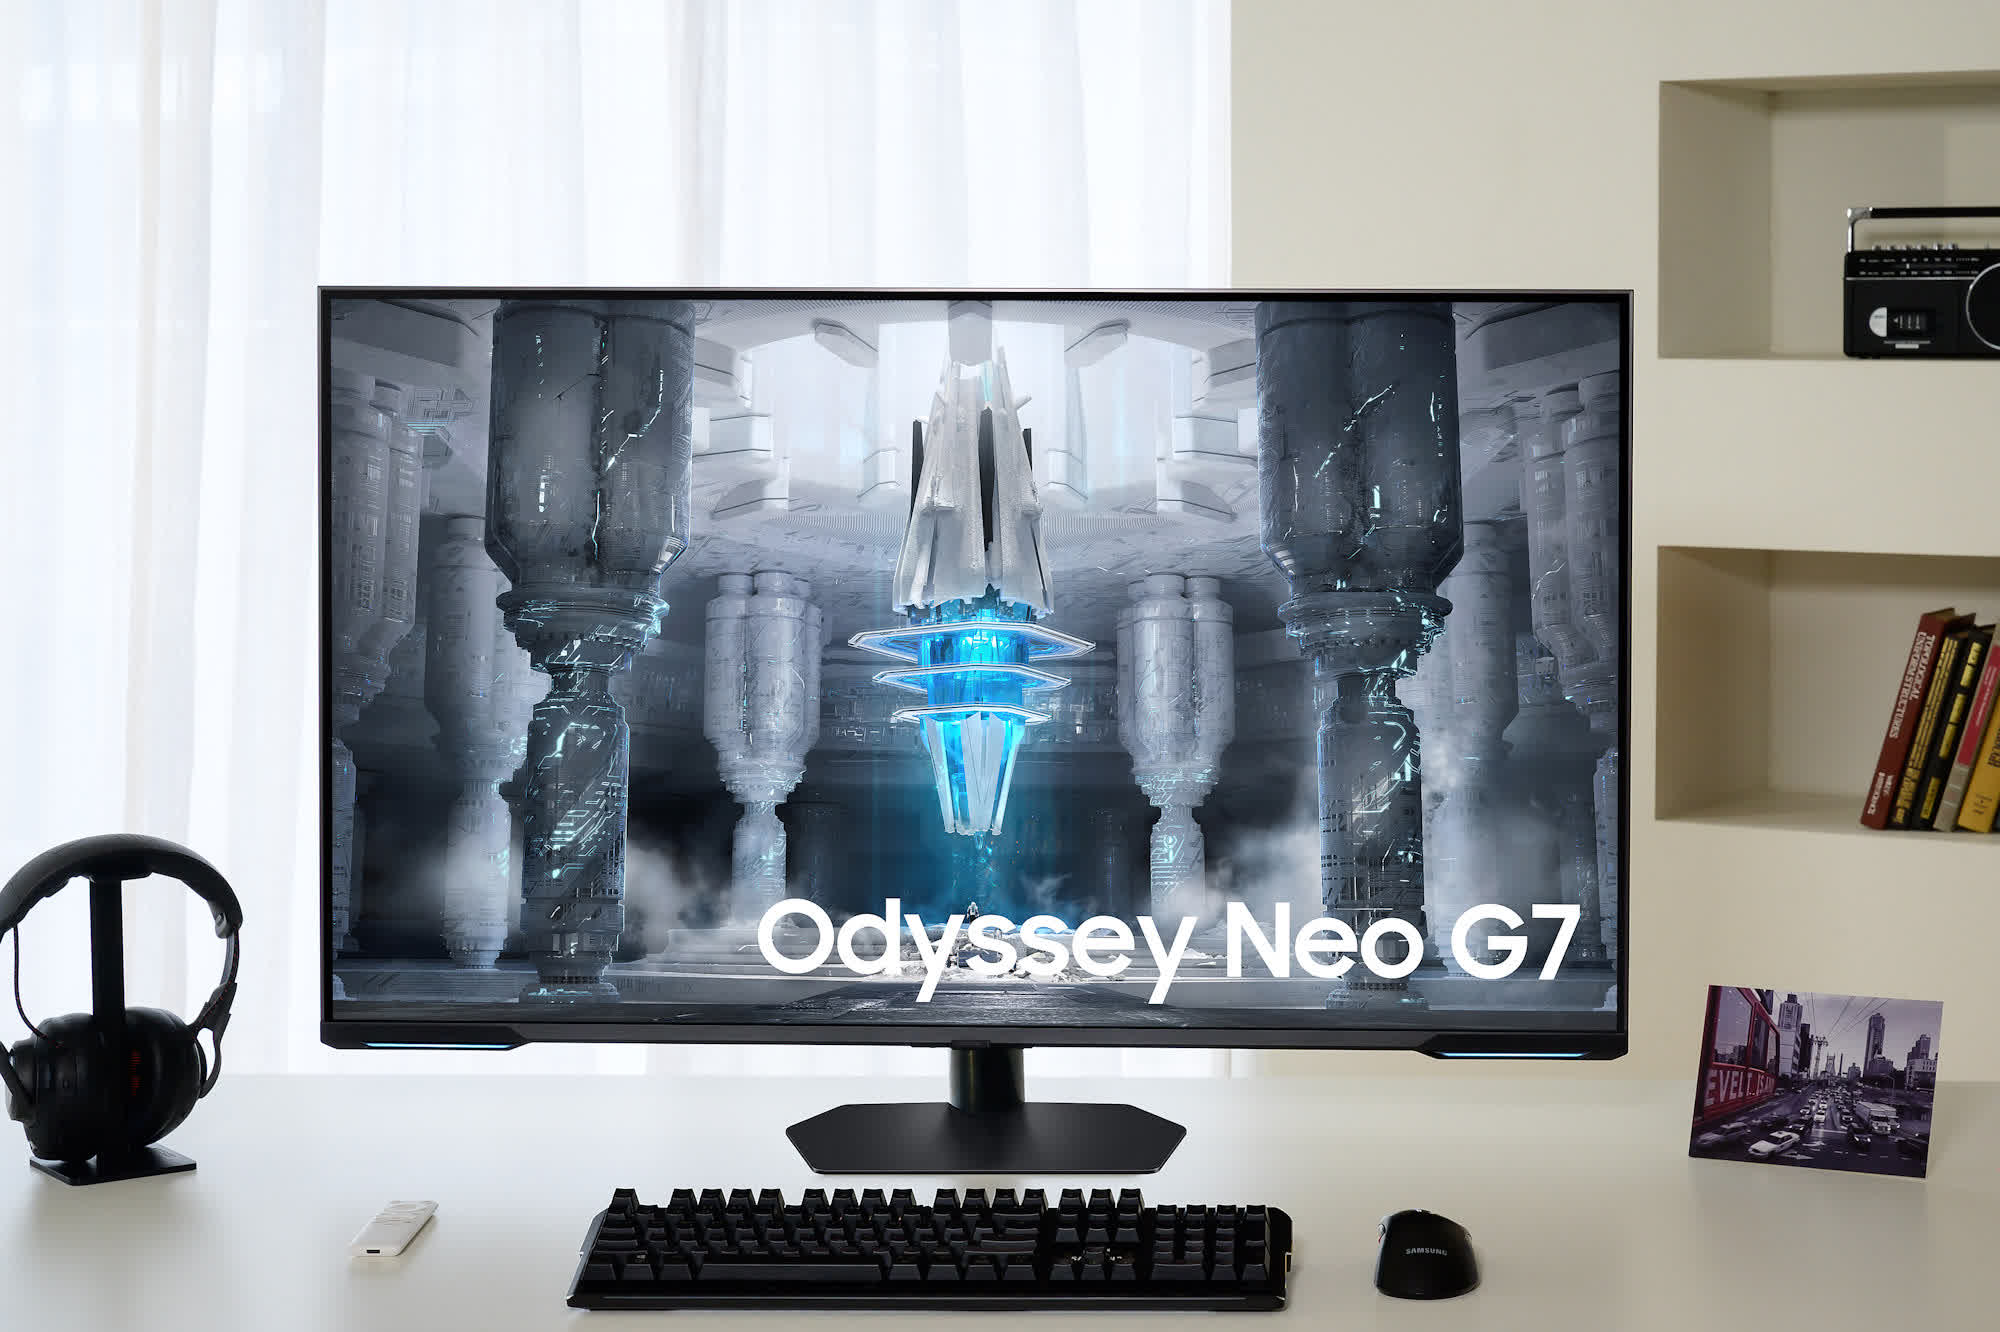 144Hz Samsung Odyssey Neo G7 4K UHD monitor goes on sale for $1000